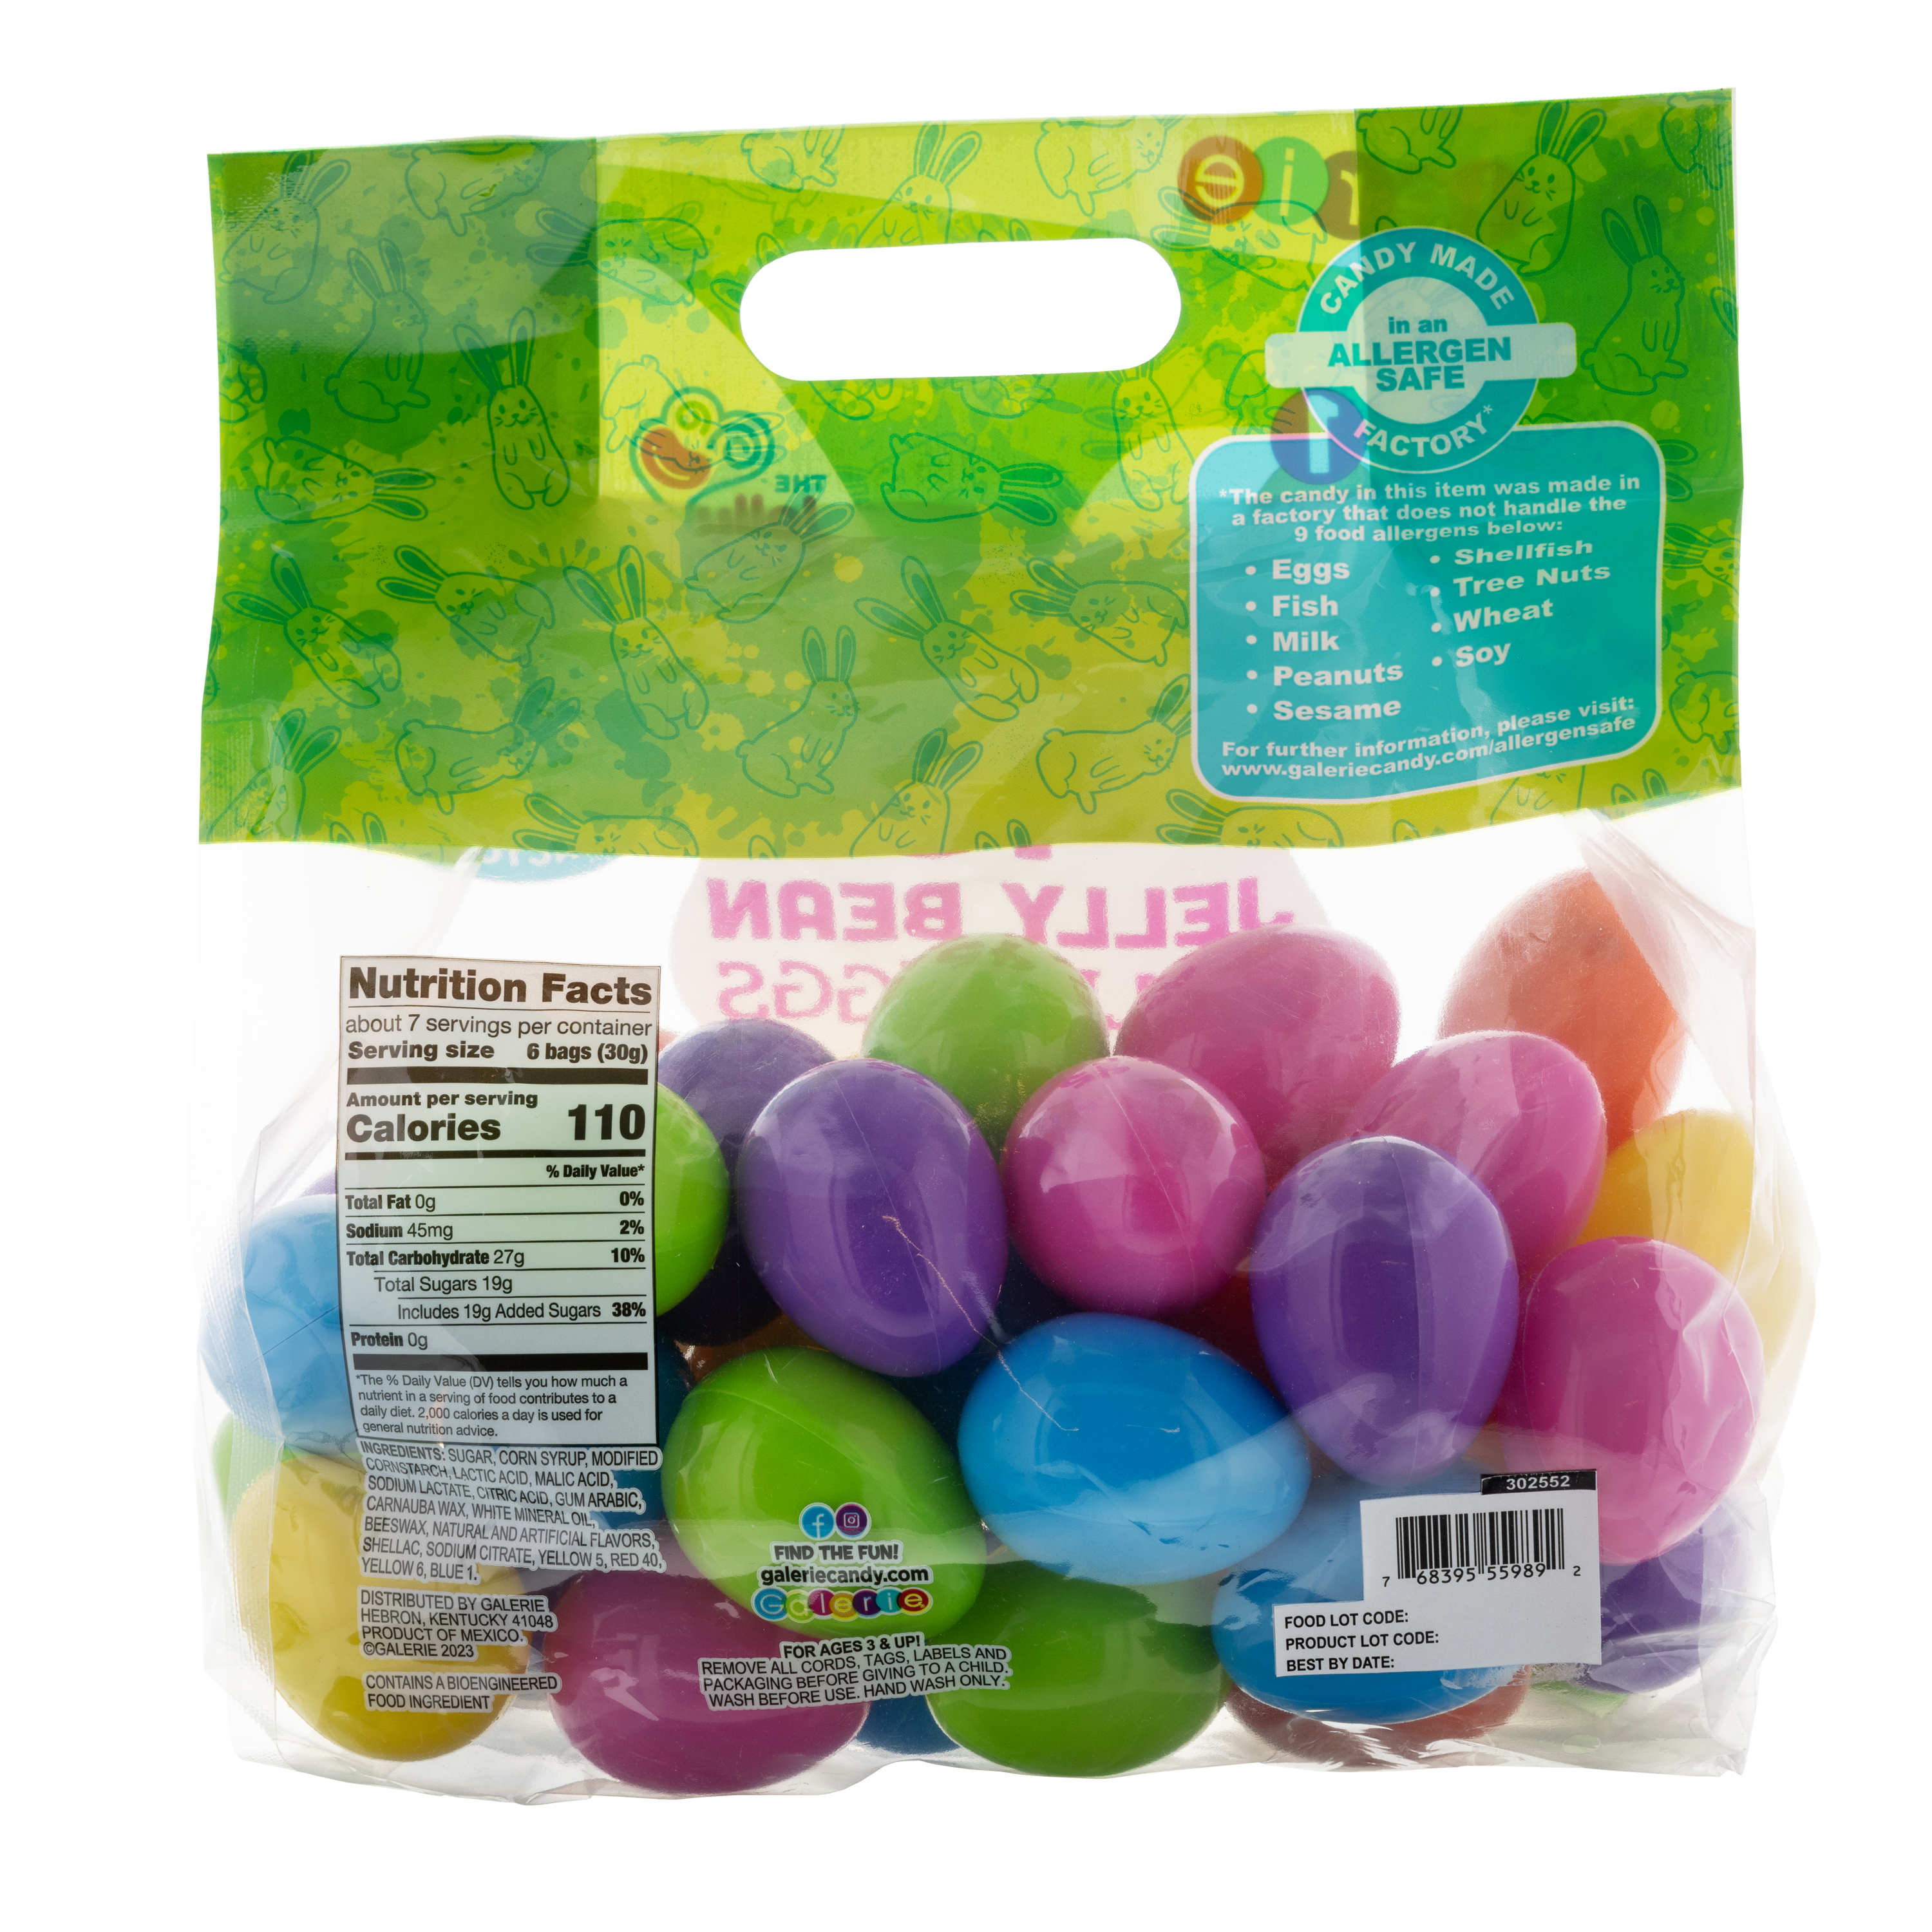 Galerie 45 Count Egg Hunt Bag with Jellybeans, 7.94 oz - image 2 of 5